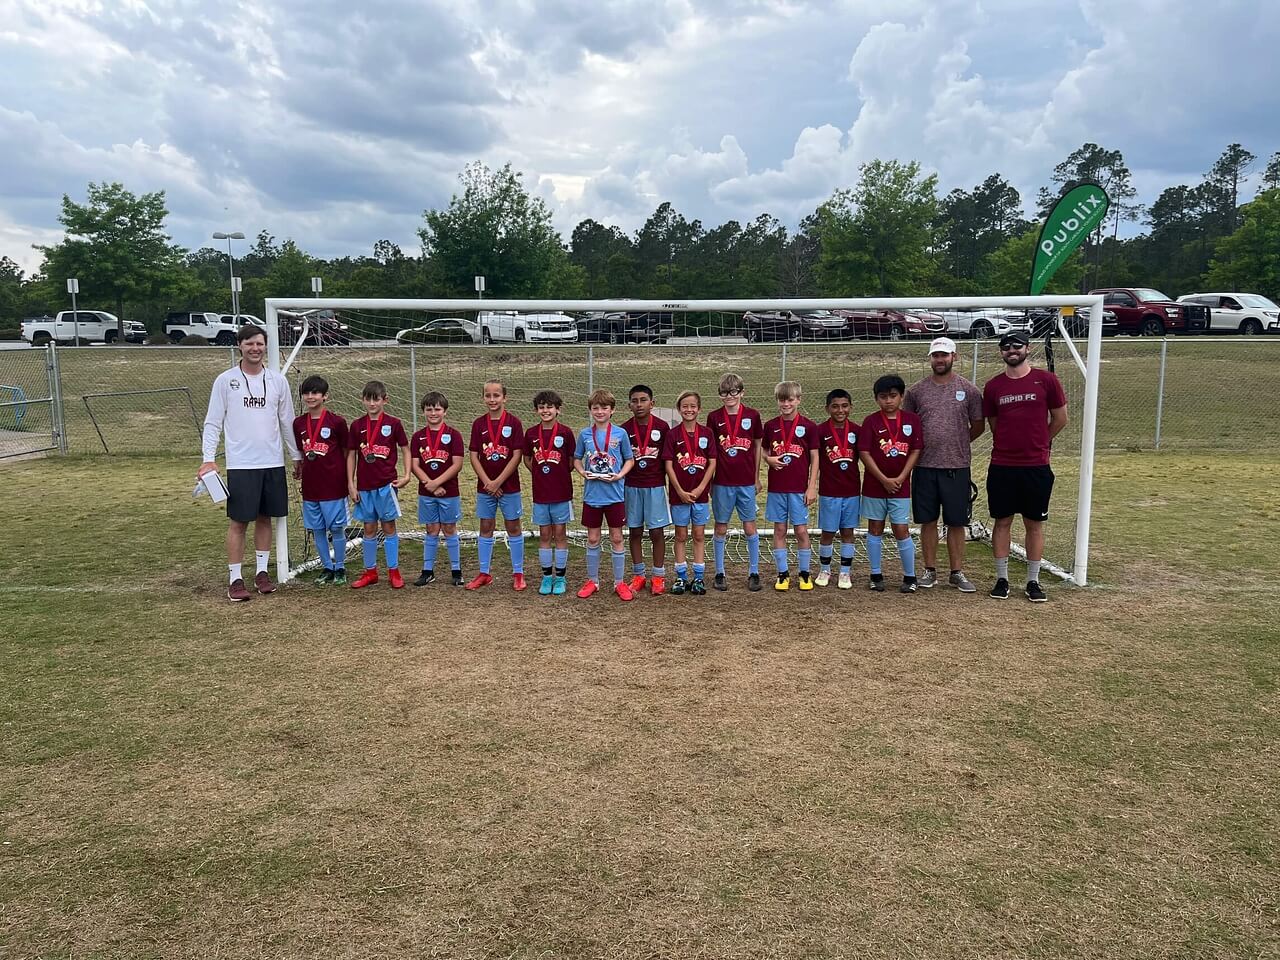 B12U - CRFC Sky 10 Finish Runner-Up at Publix Academy Cup